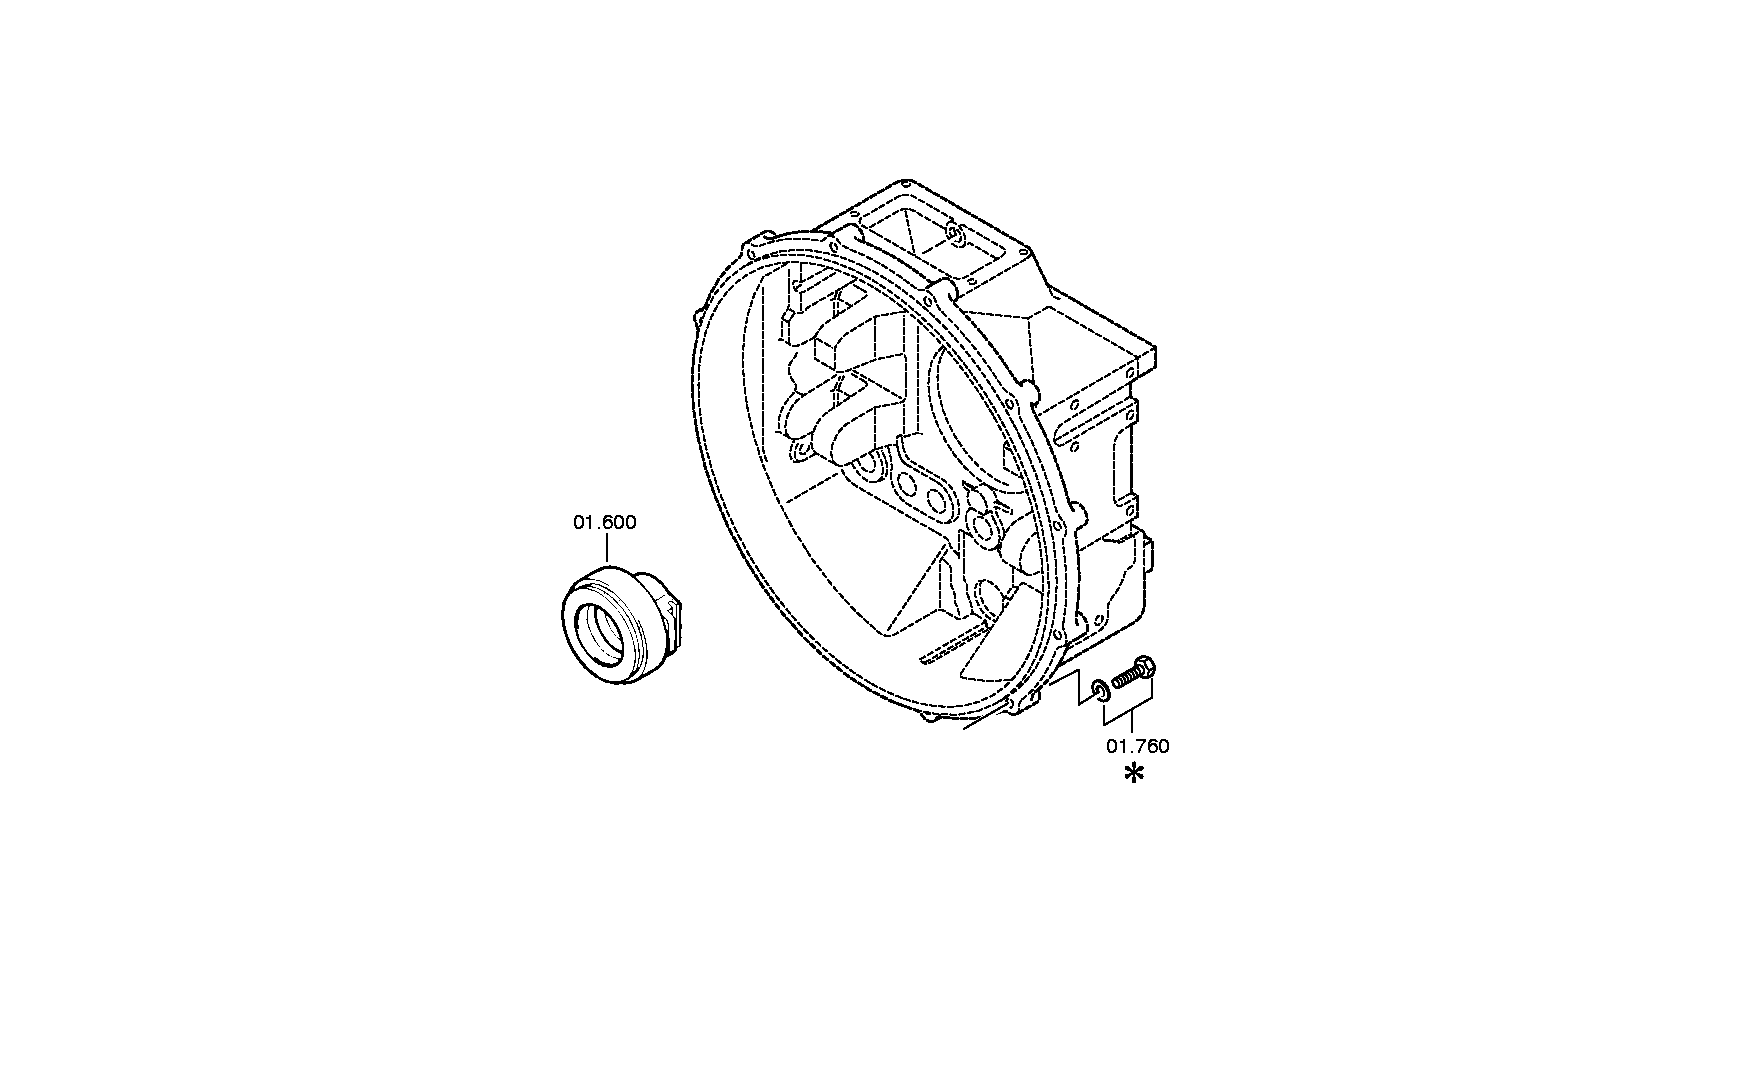 drawing for CARROCERIAS AYATS 0501006795 - CLUTCH CYLINDER (figure 1)